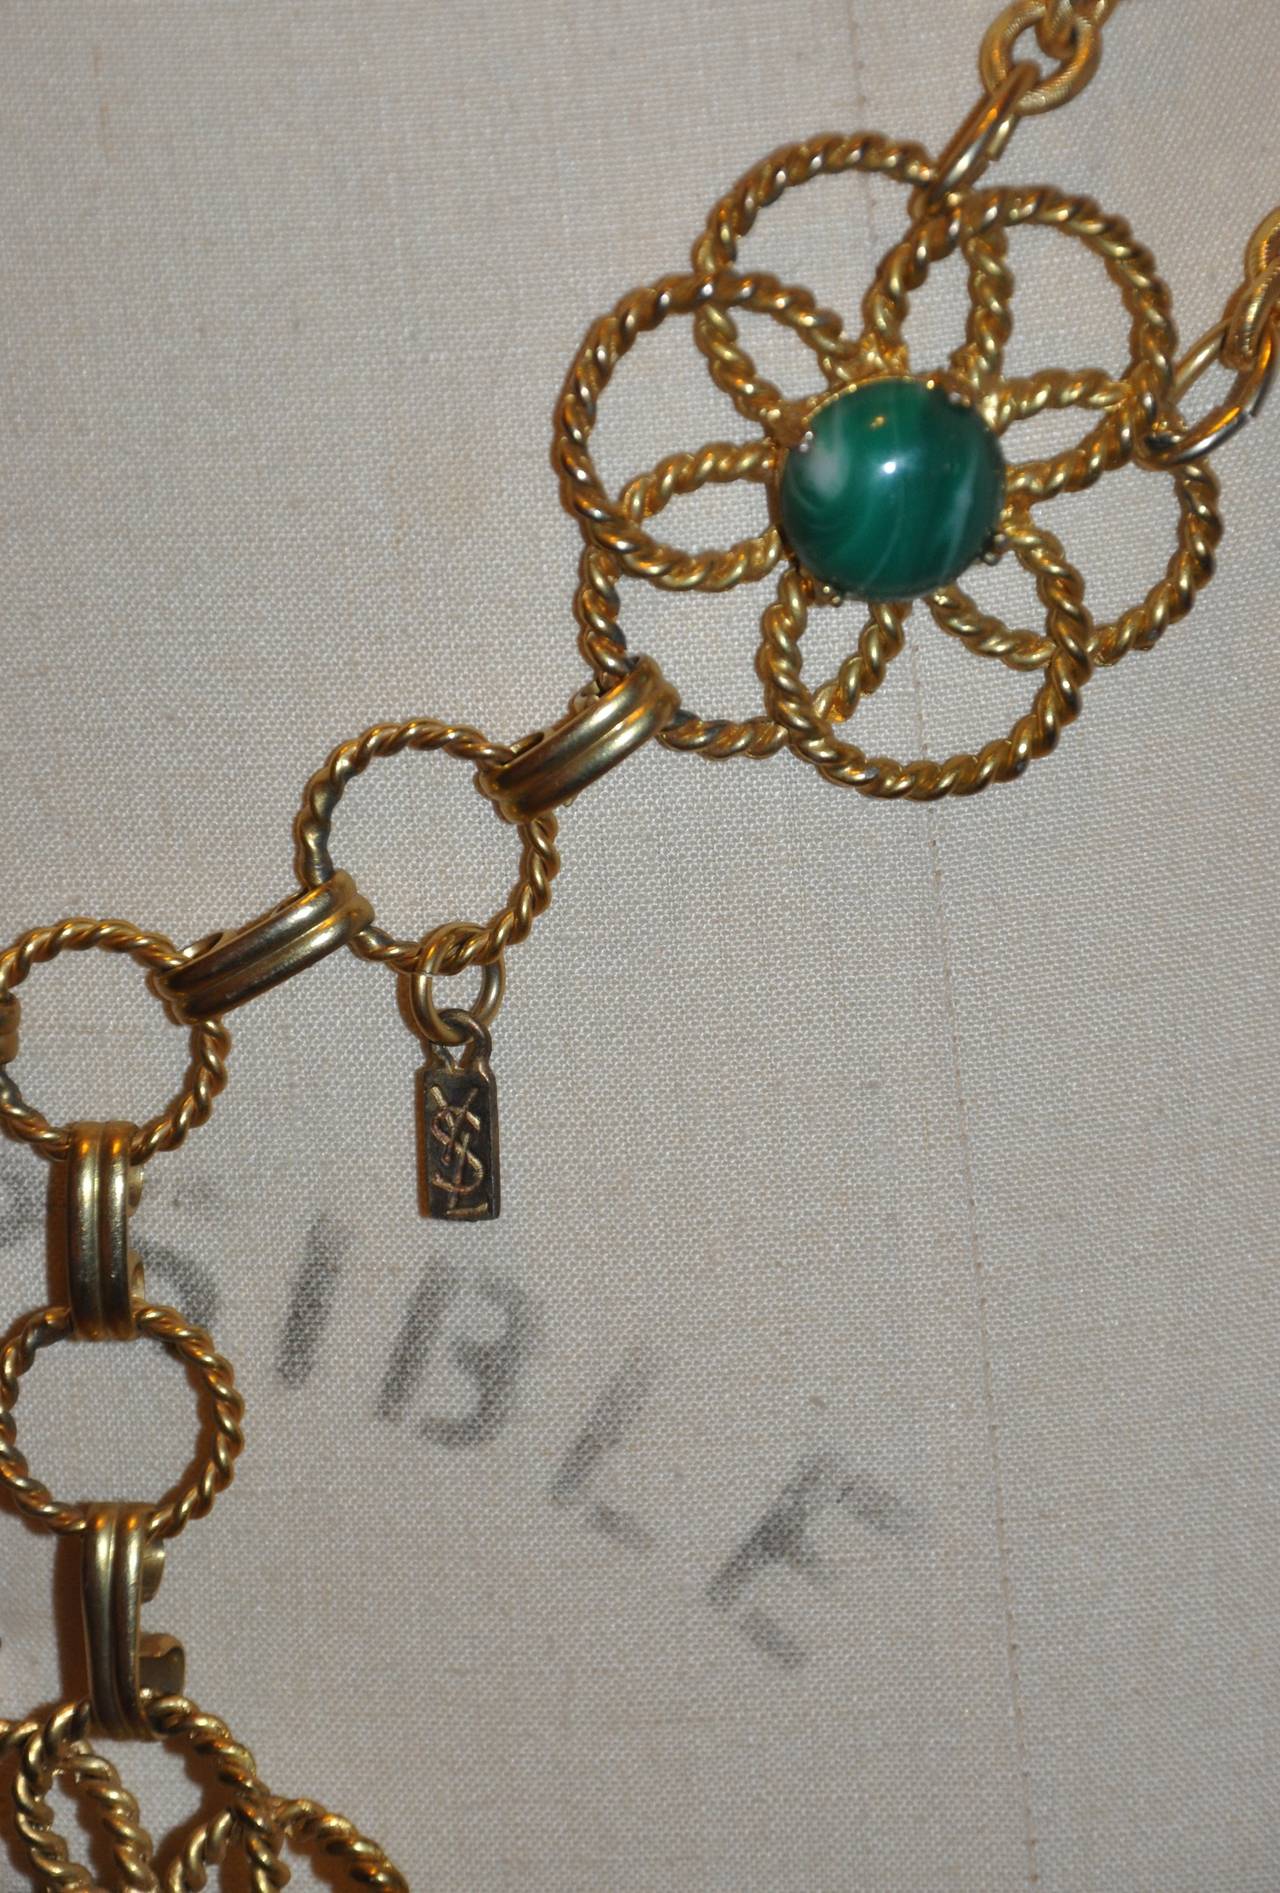 This wonderfully detailed rare Yves Saint Laurent multi-stones in colors of greens, and browns is combined with gilded gold hardware and finished with their signature engraved name-plate attached. The belt measures 2 1/8